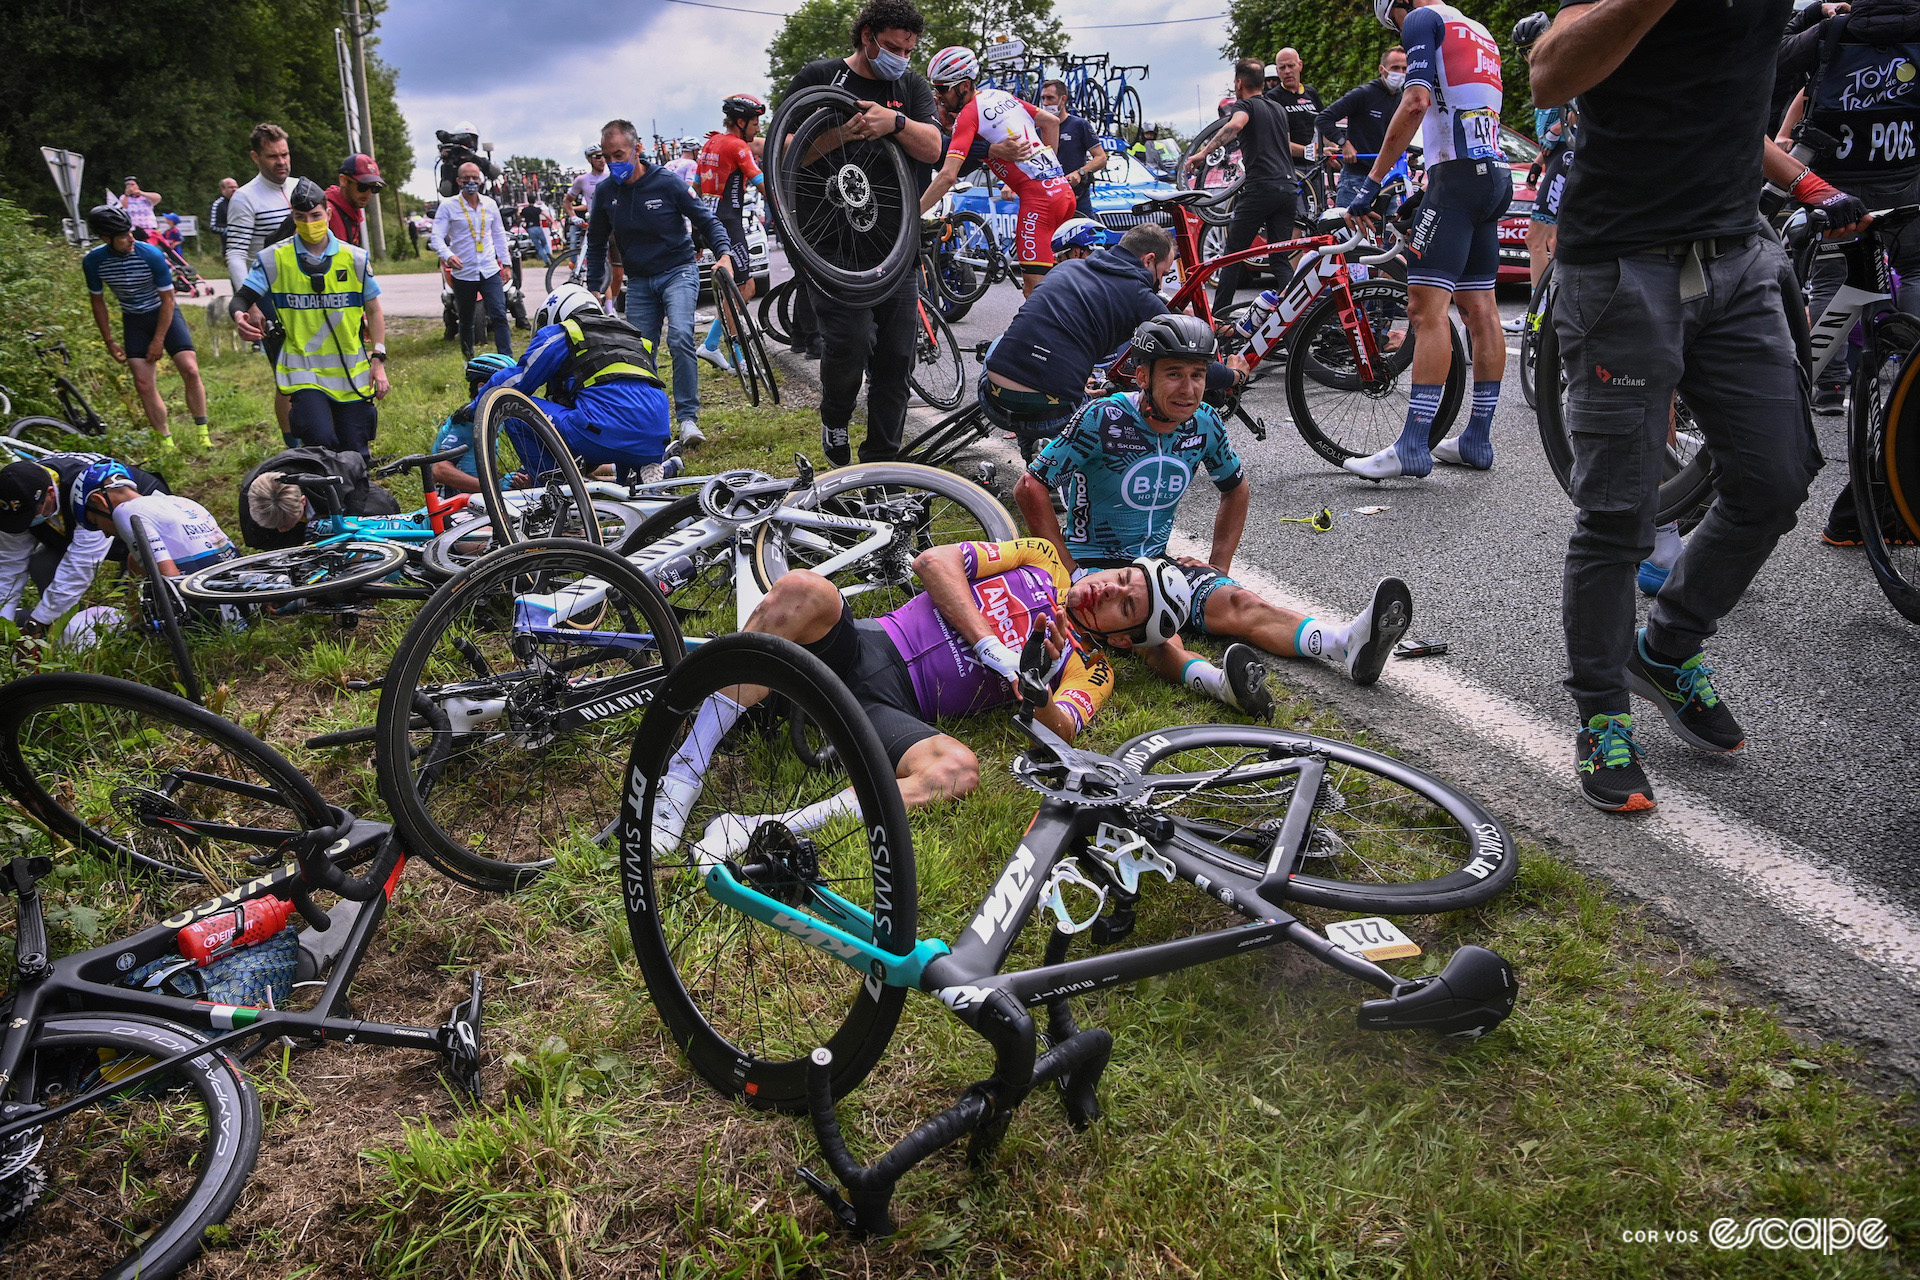 A photo of the strewn bikes and riders following a mass crash during stage 1 of the 2021 Tour de France.